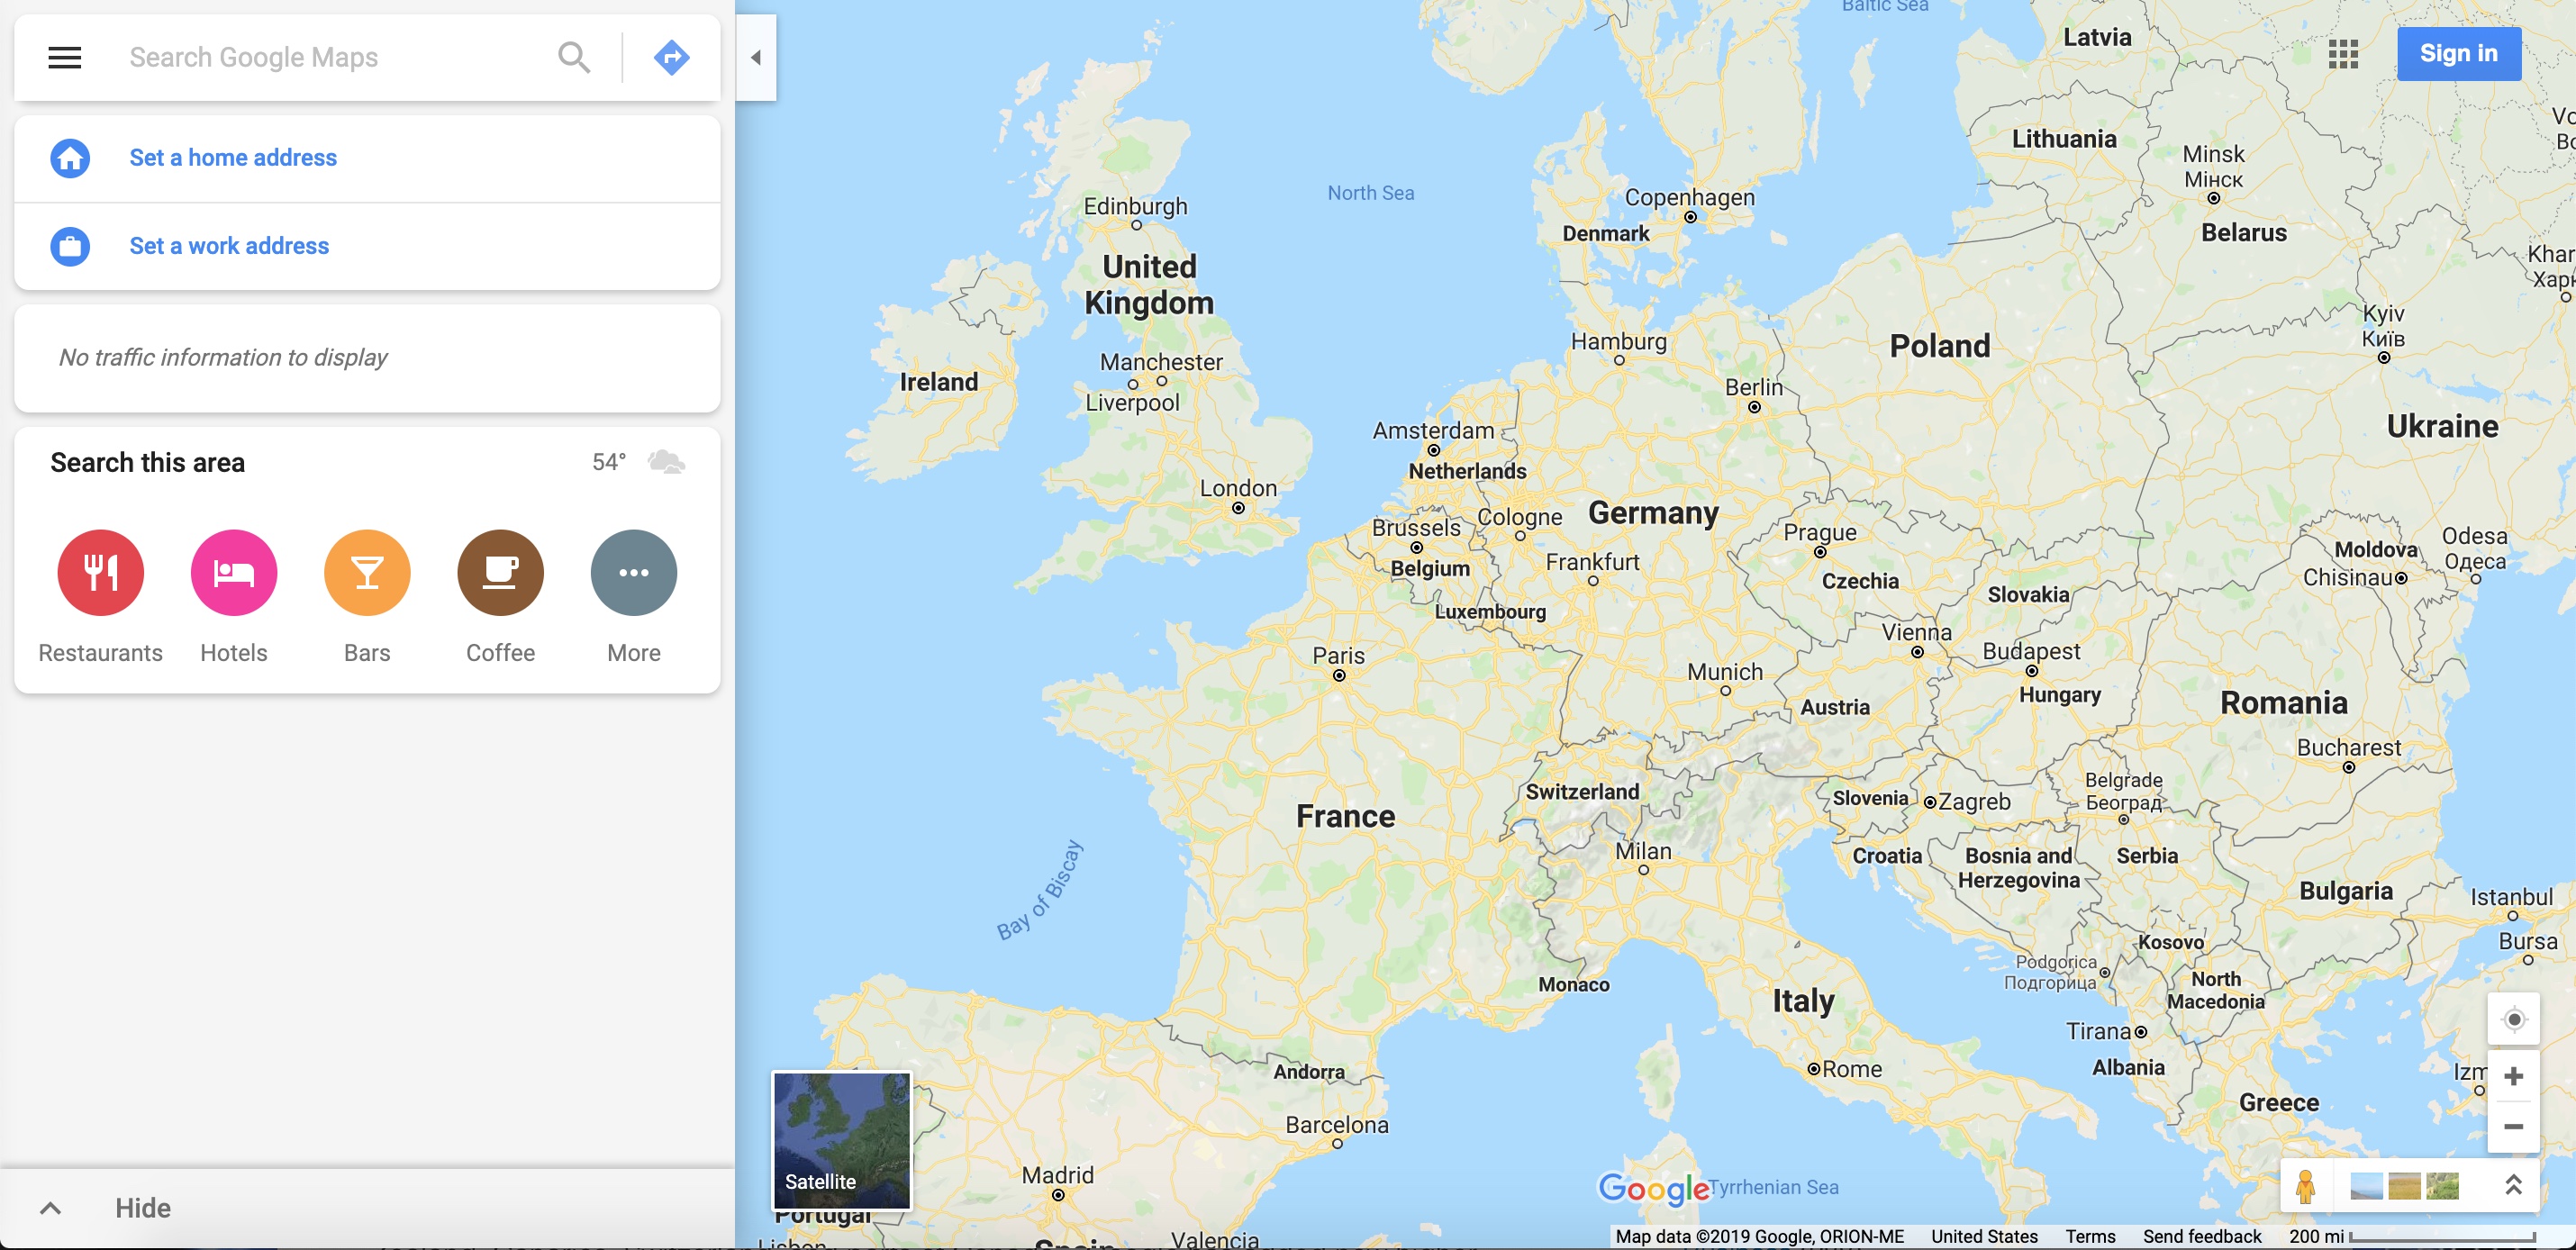 Google Maps view of Europe (2019)